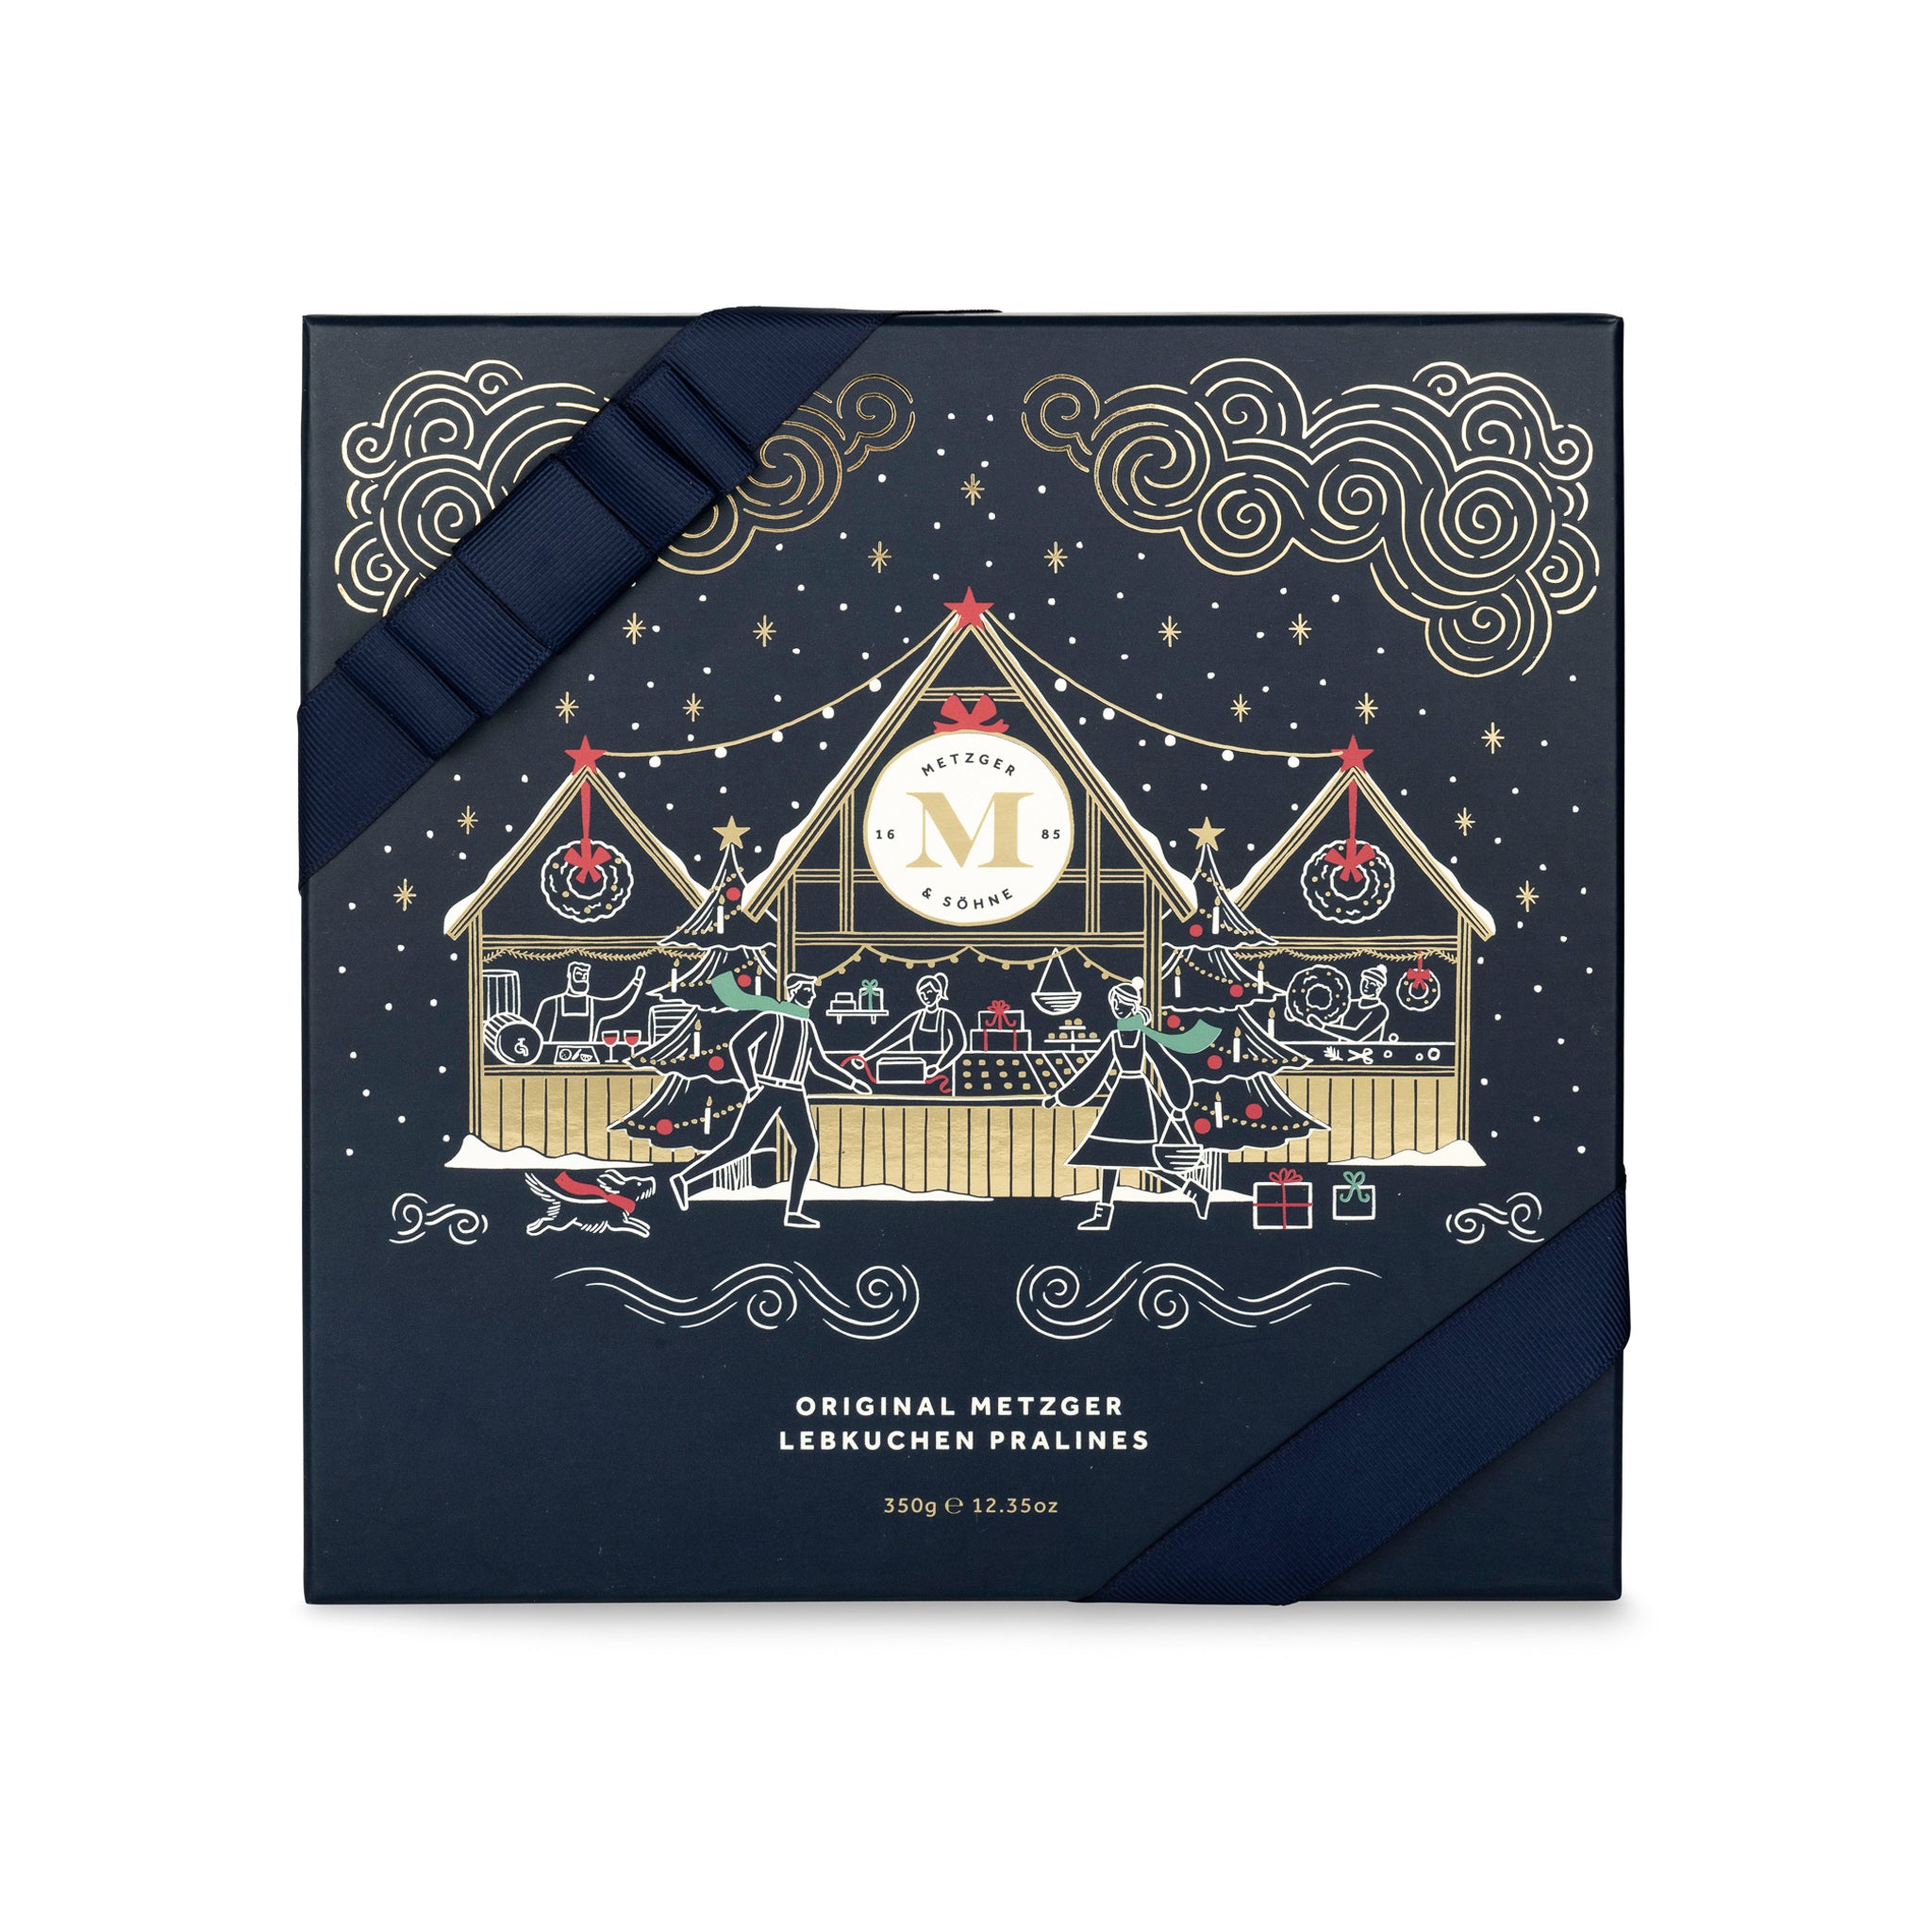 This exclusive Christmas Lebkuchen chocolate box in blue impresses with its high-quality workmanship and the motif with gold foil print! It is filled with 25 exquisite and tastefully decorated gingerbread chocolates.